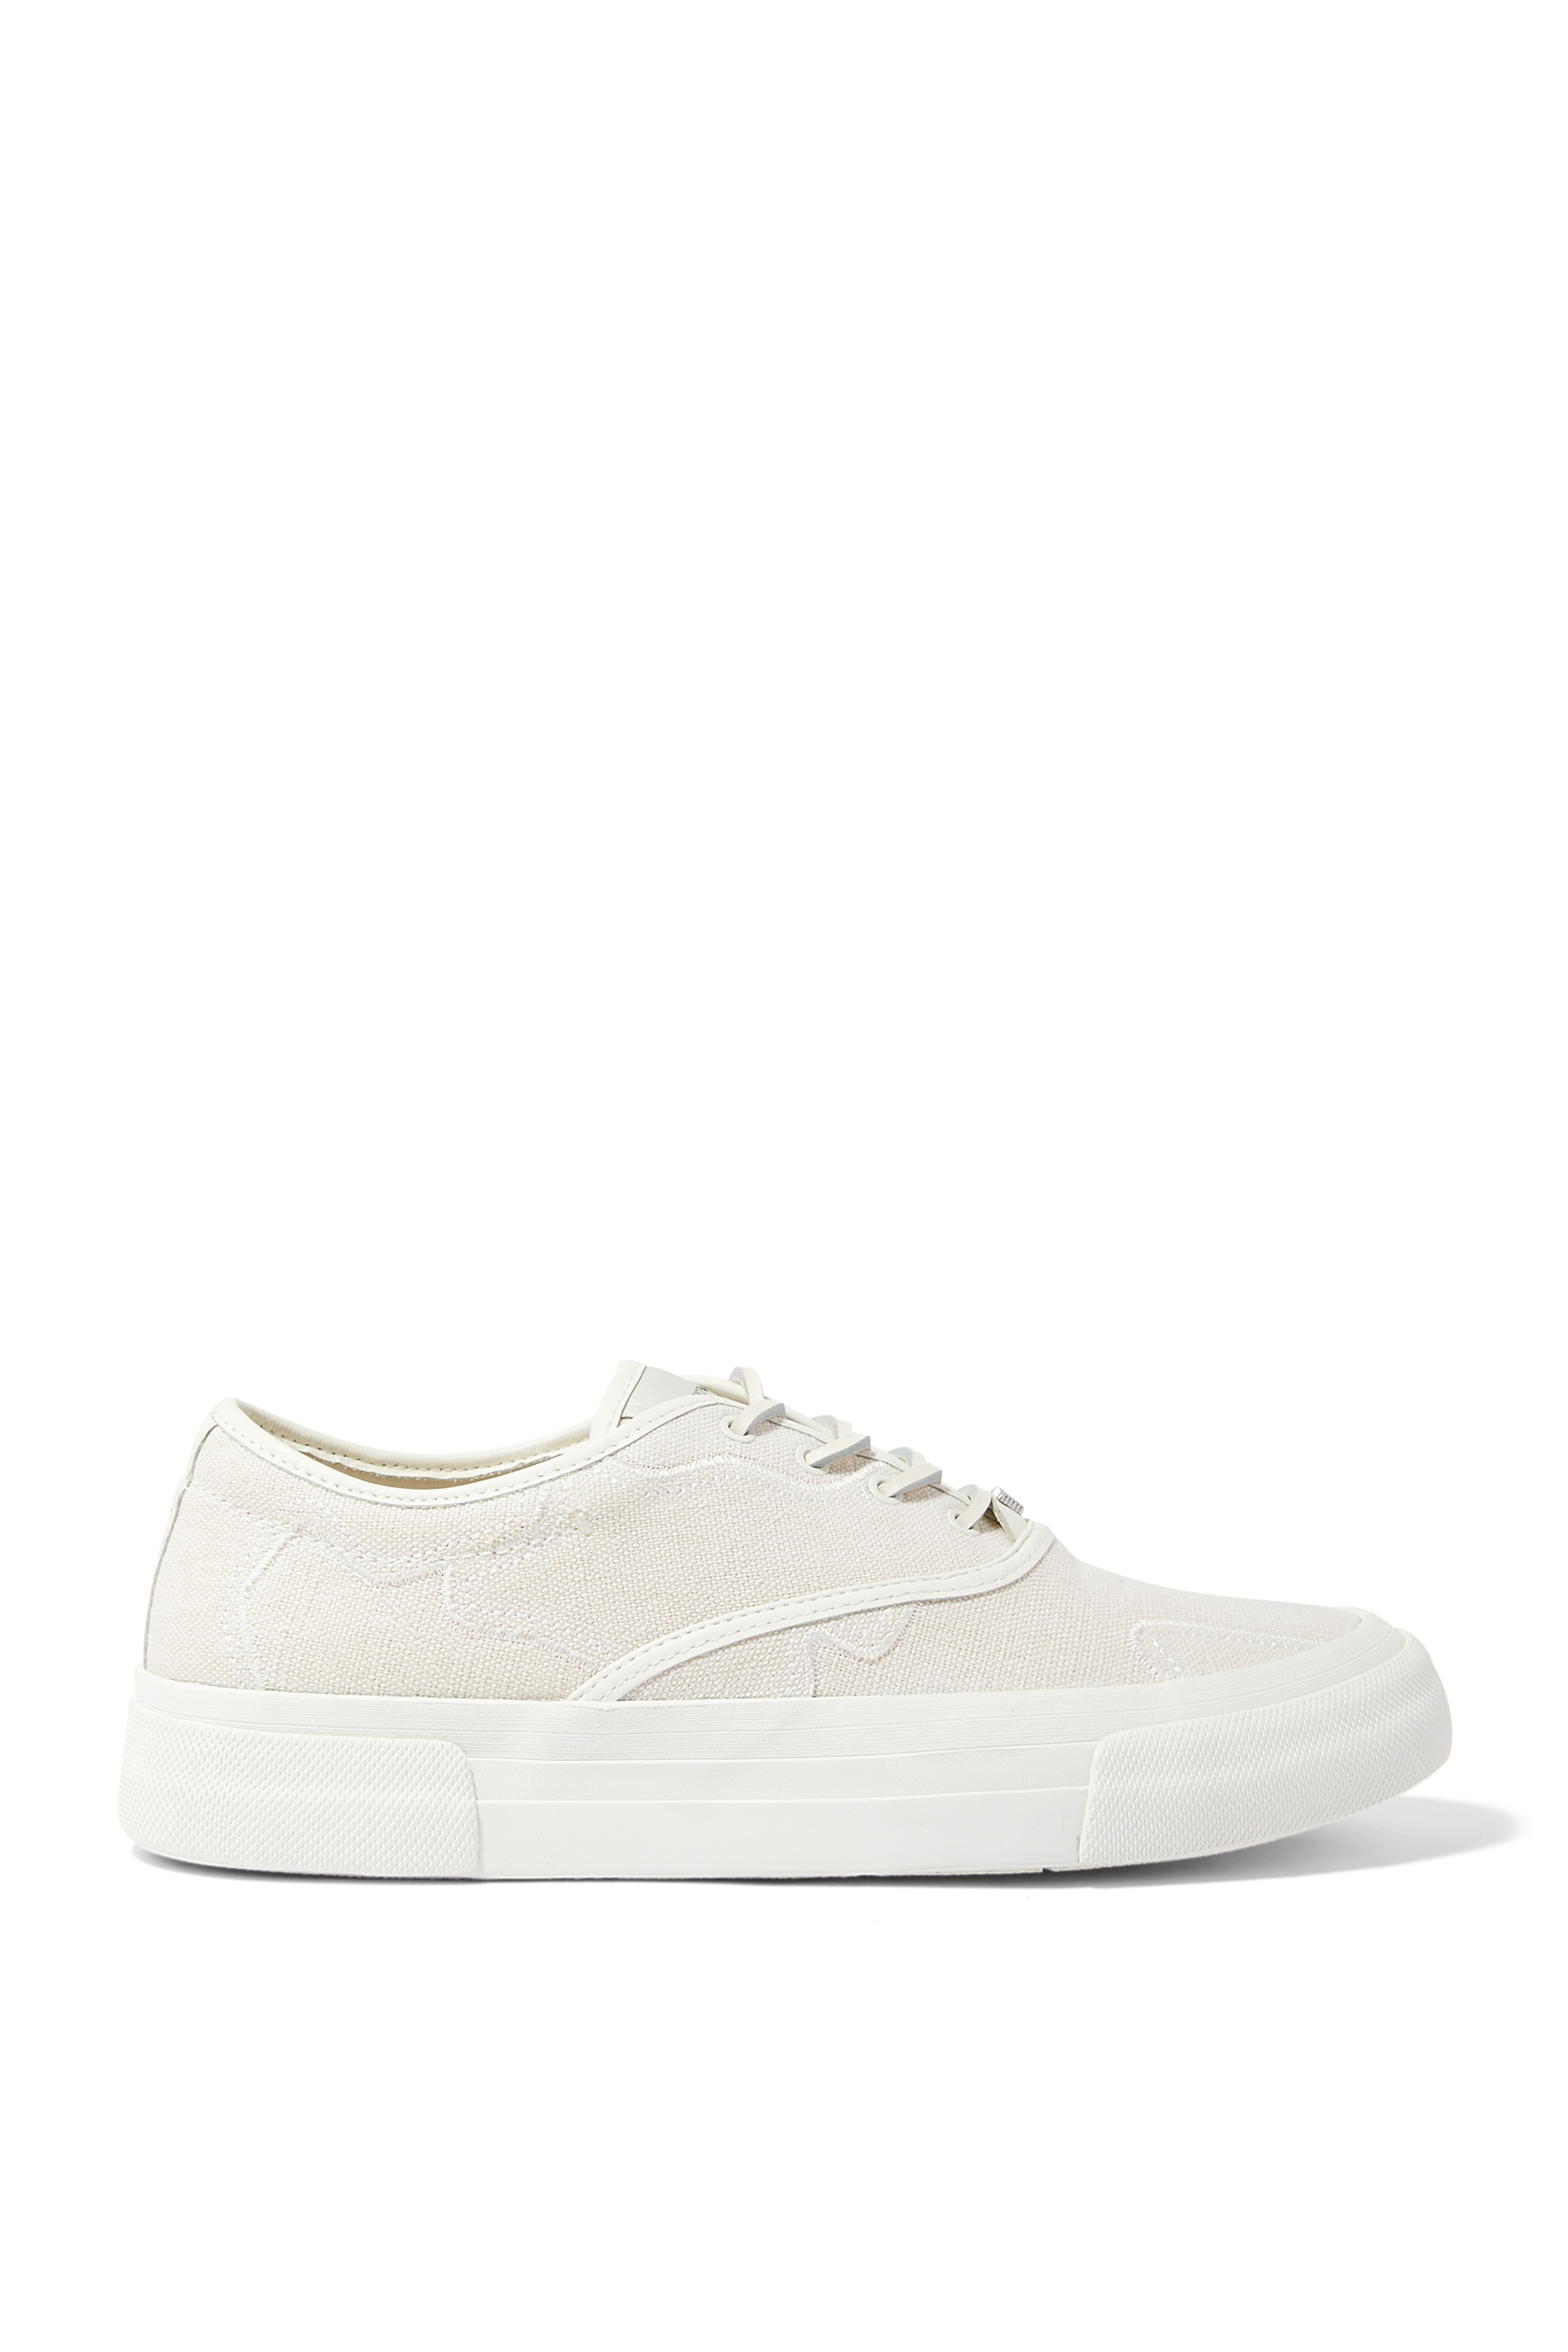 Emporio Armani Canvas Sneakers with Vegetable-Tanned Leather Details